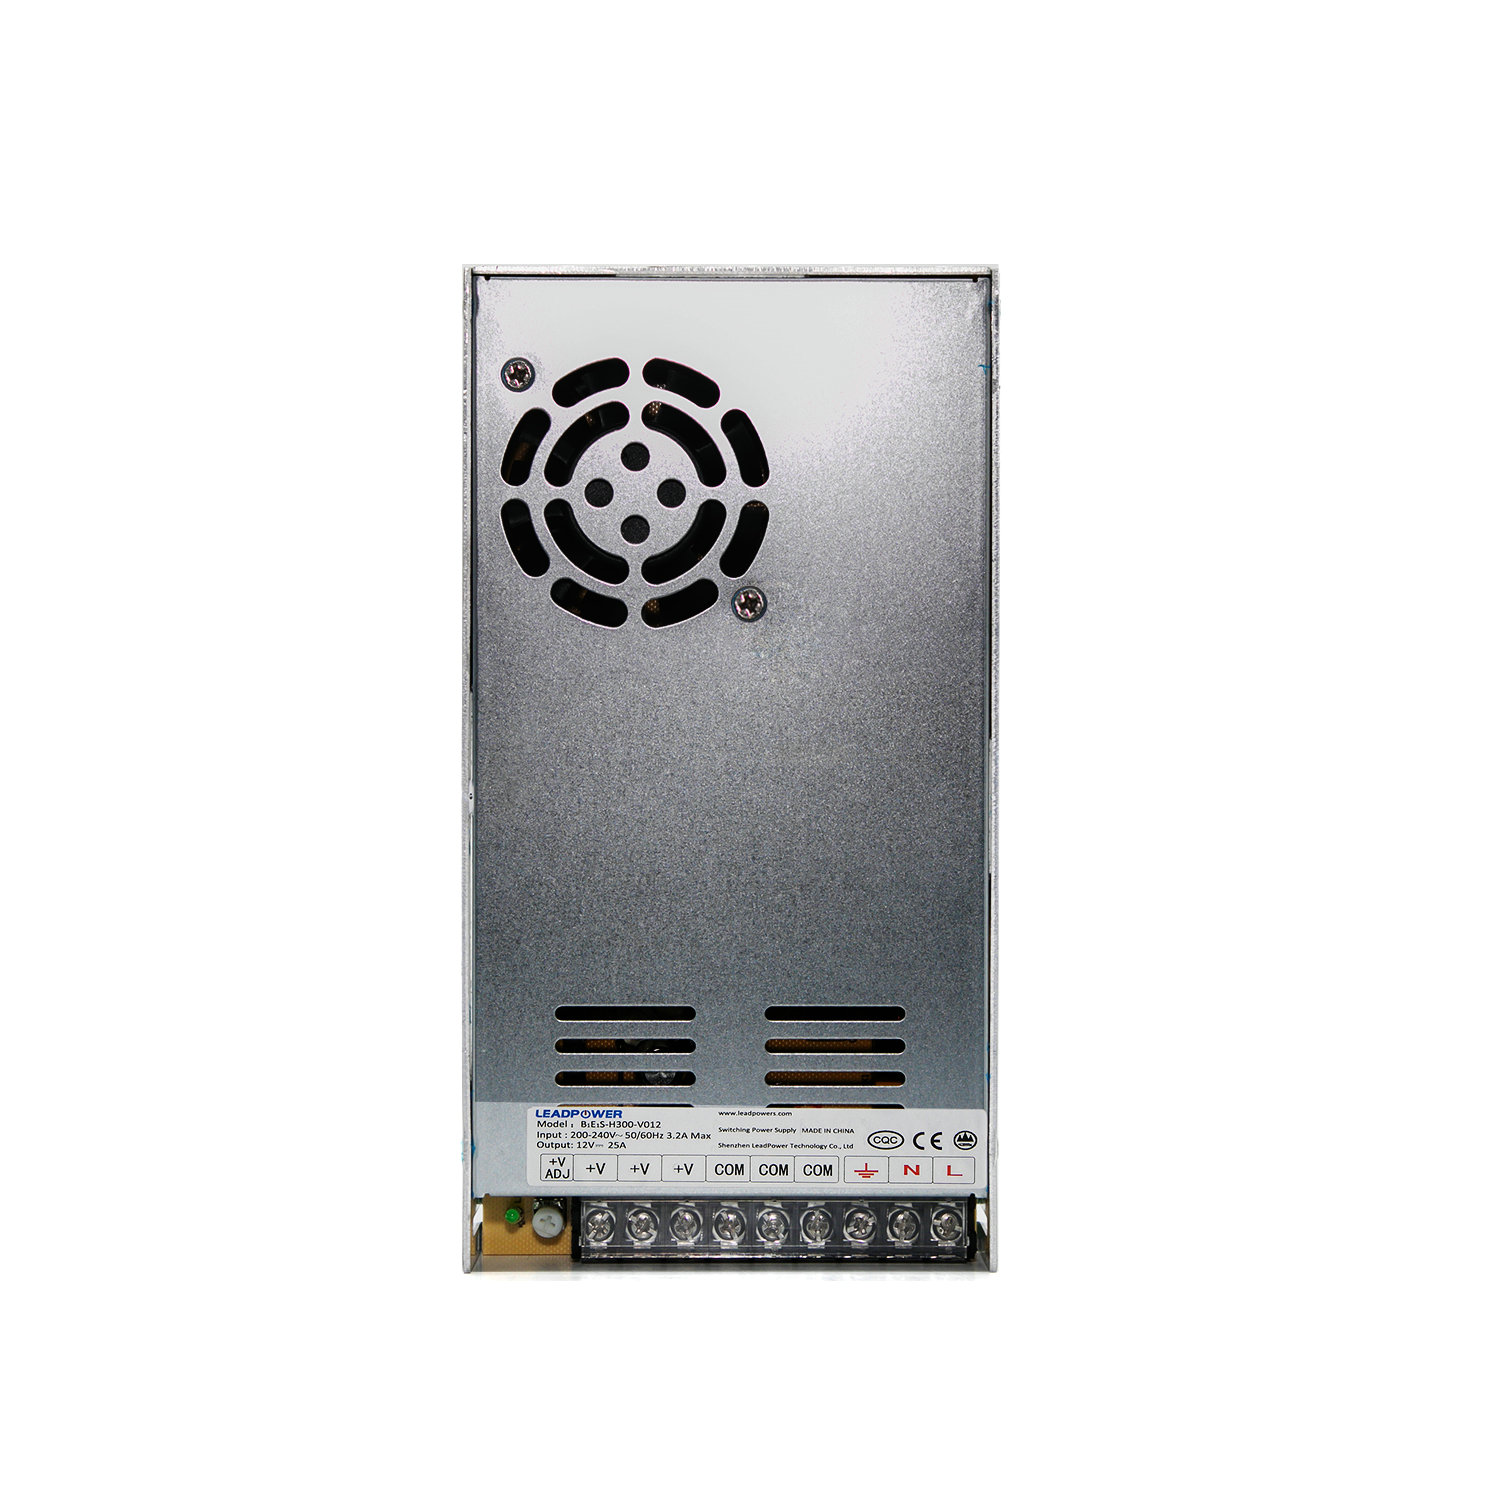 BBN-H300 Series Built in LED Power Supply